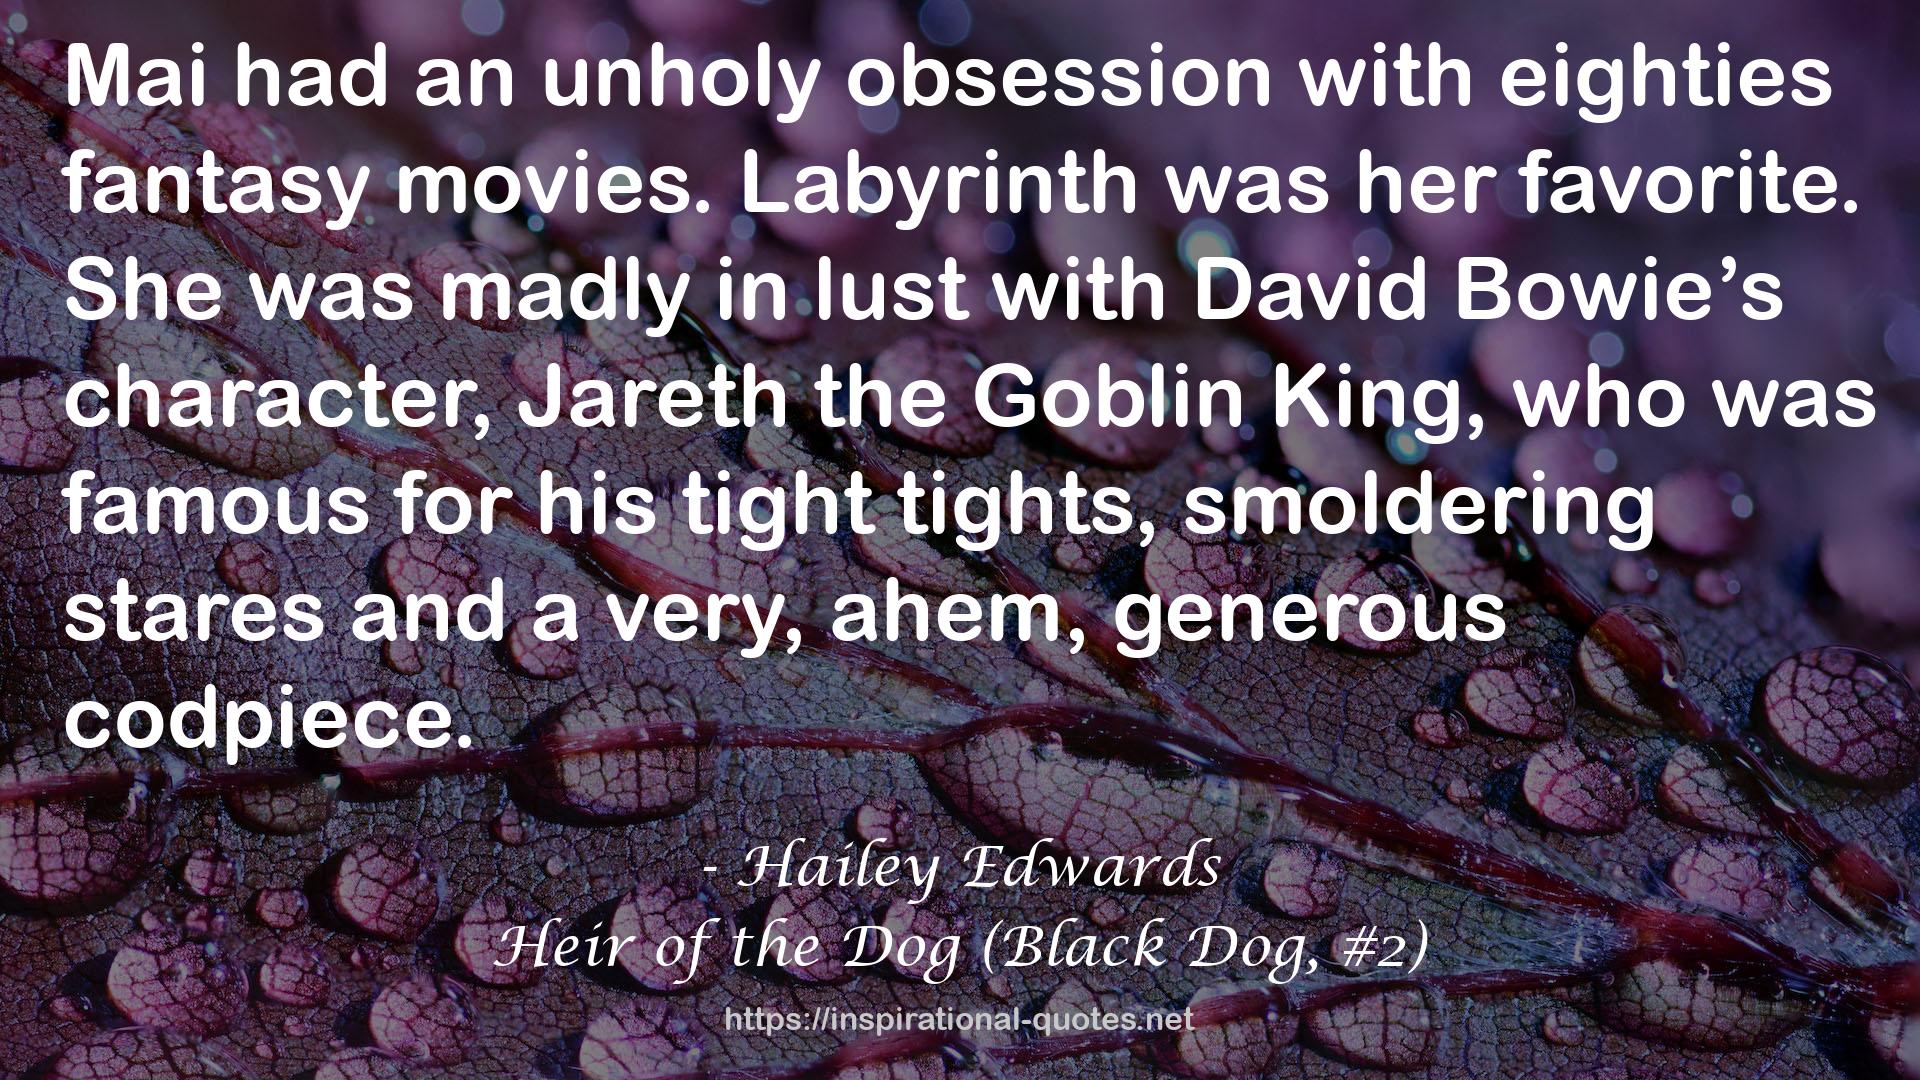 Heir of the Dog (Black Dog, #2) QUOTES